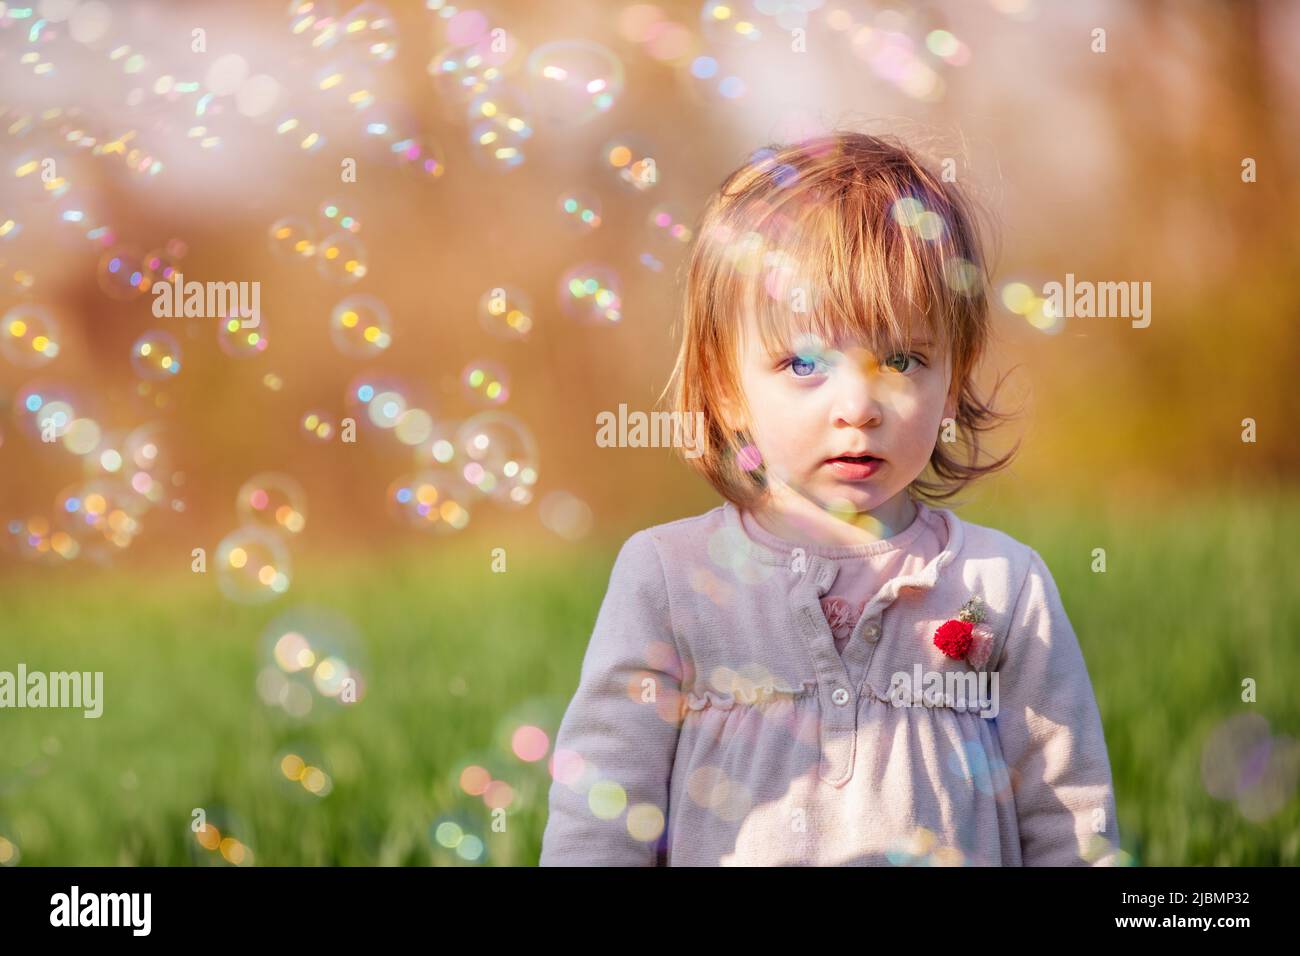 Little smiling baby girl play with soap bubbles in green field Stock Photo